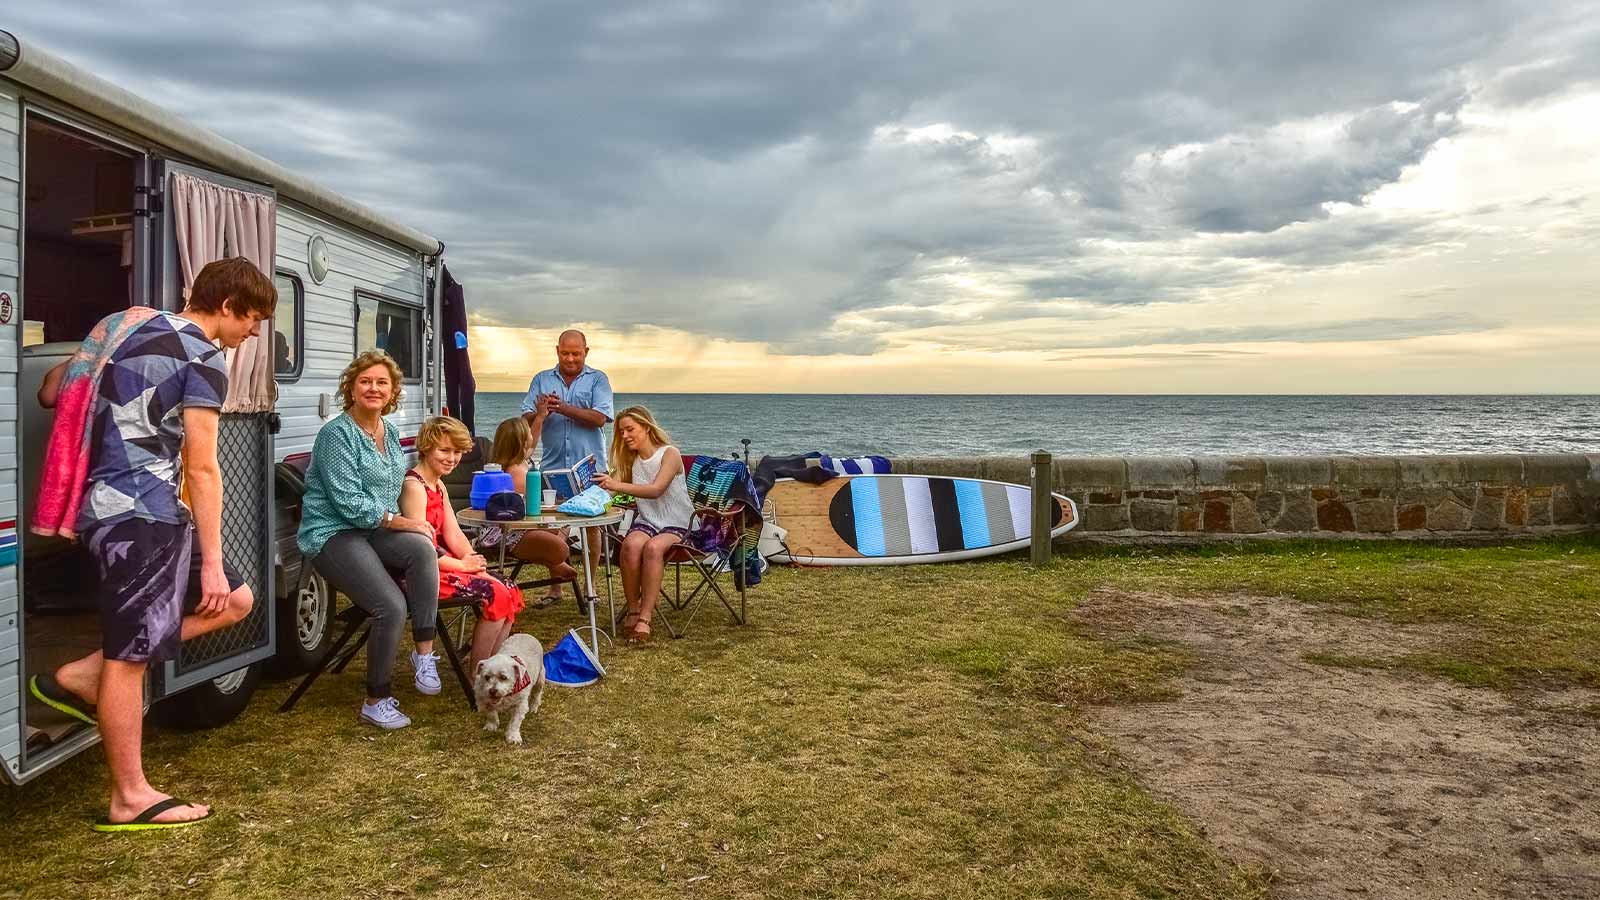 A family sitting together outside their caravan, overlooking the ocean.